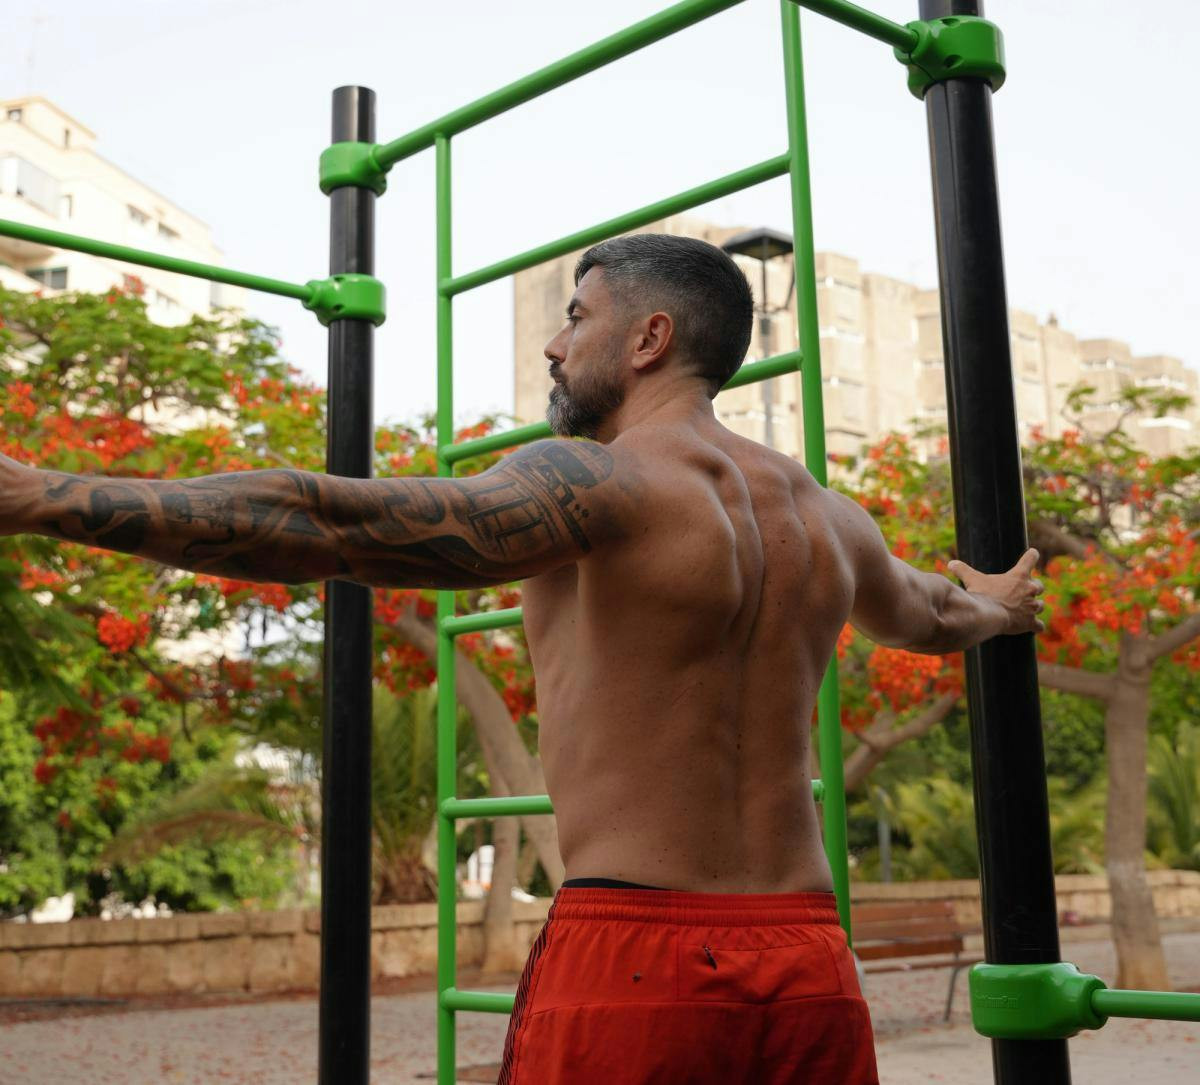 Cadence in Calisthenics training for Hypertrophy and/or Strength